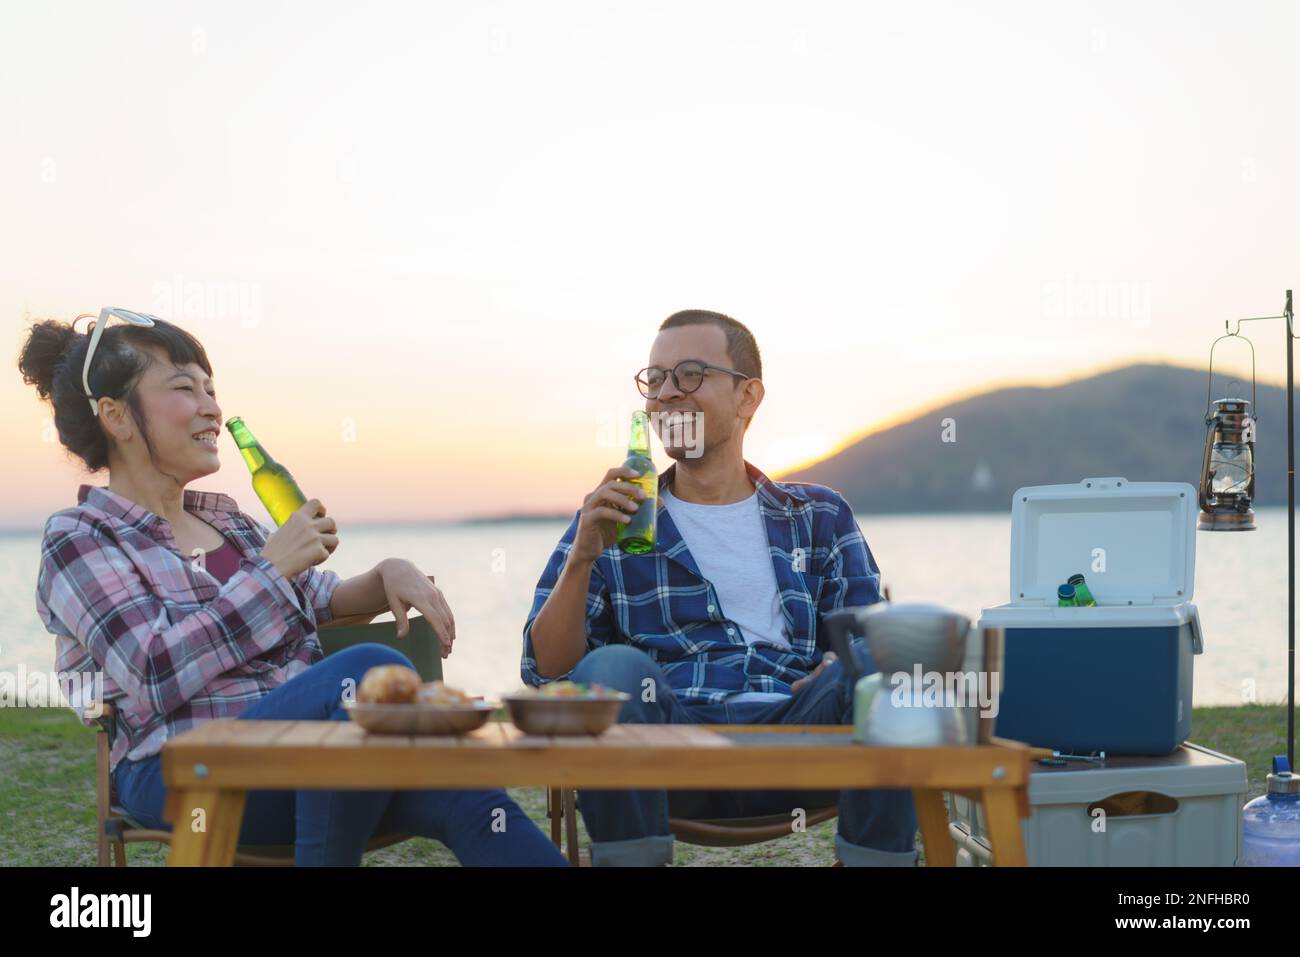 Asian couple drinking beer from bottle in their camping area with lake in the background during sunset. Stock Photo